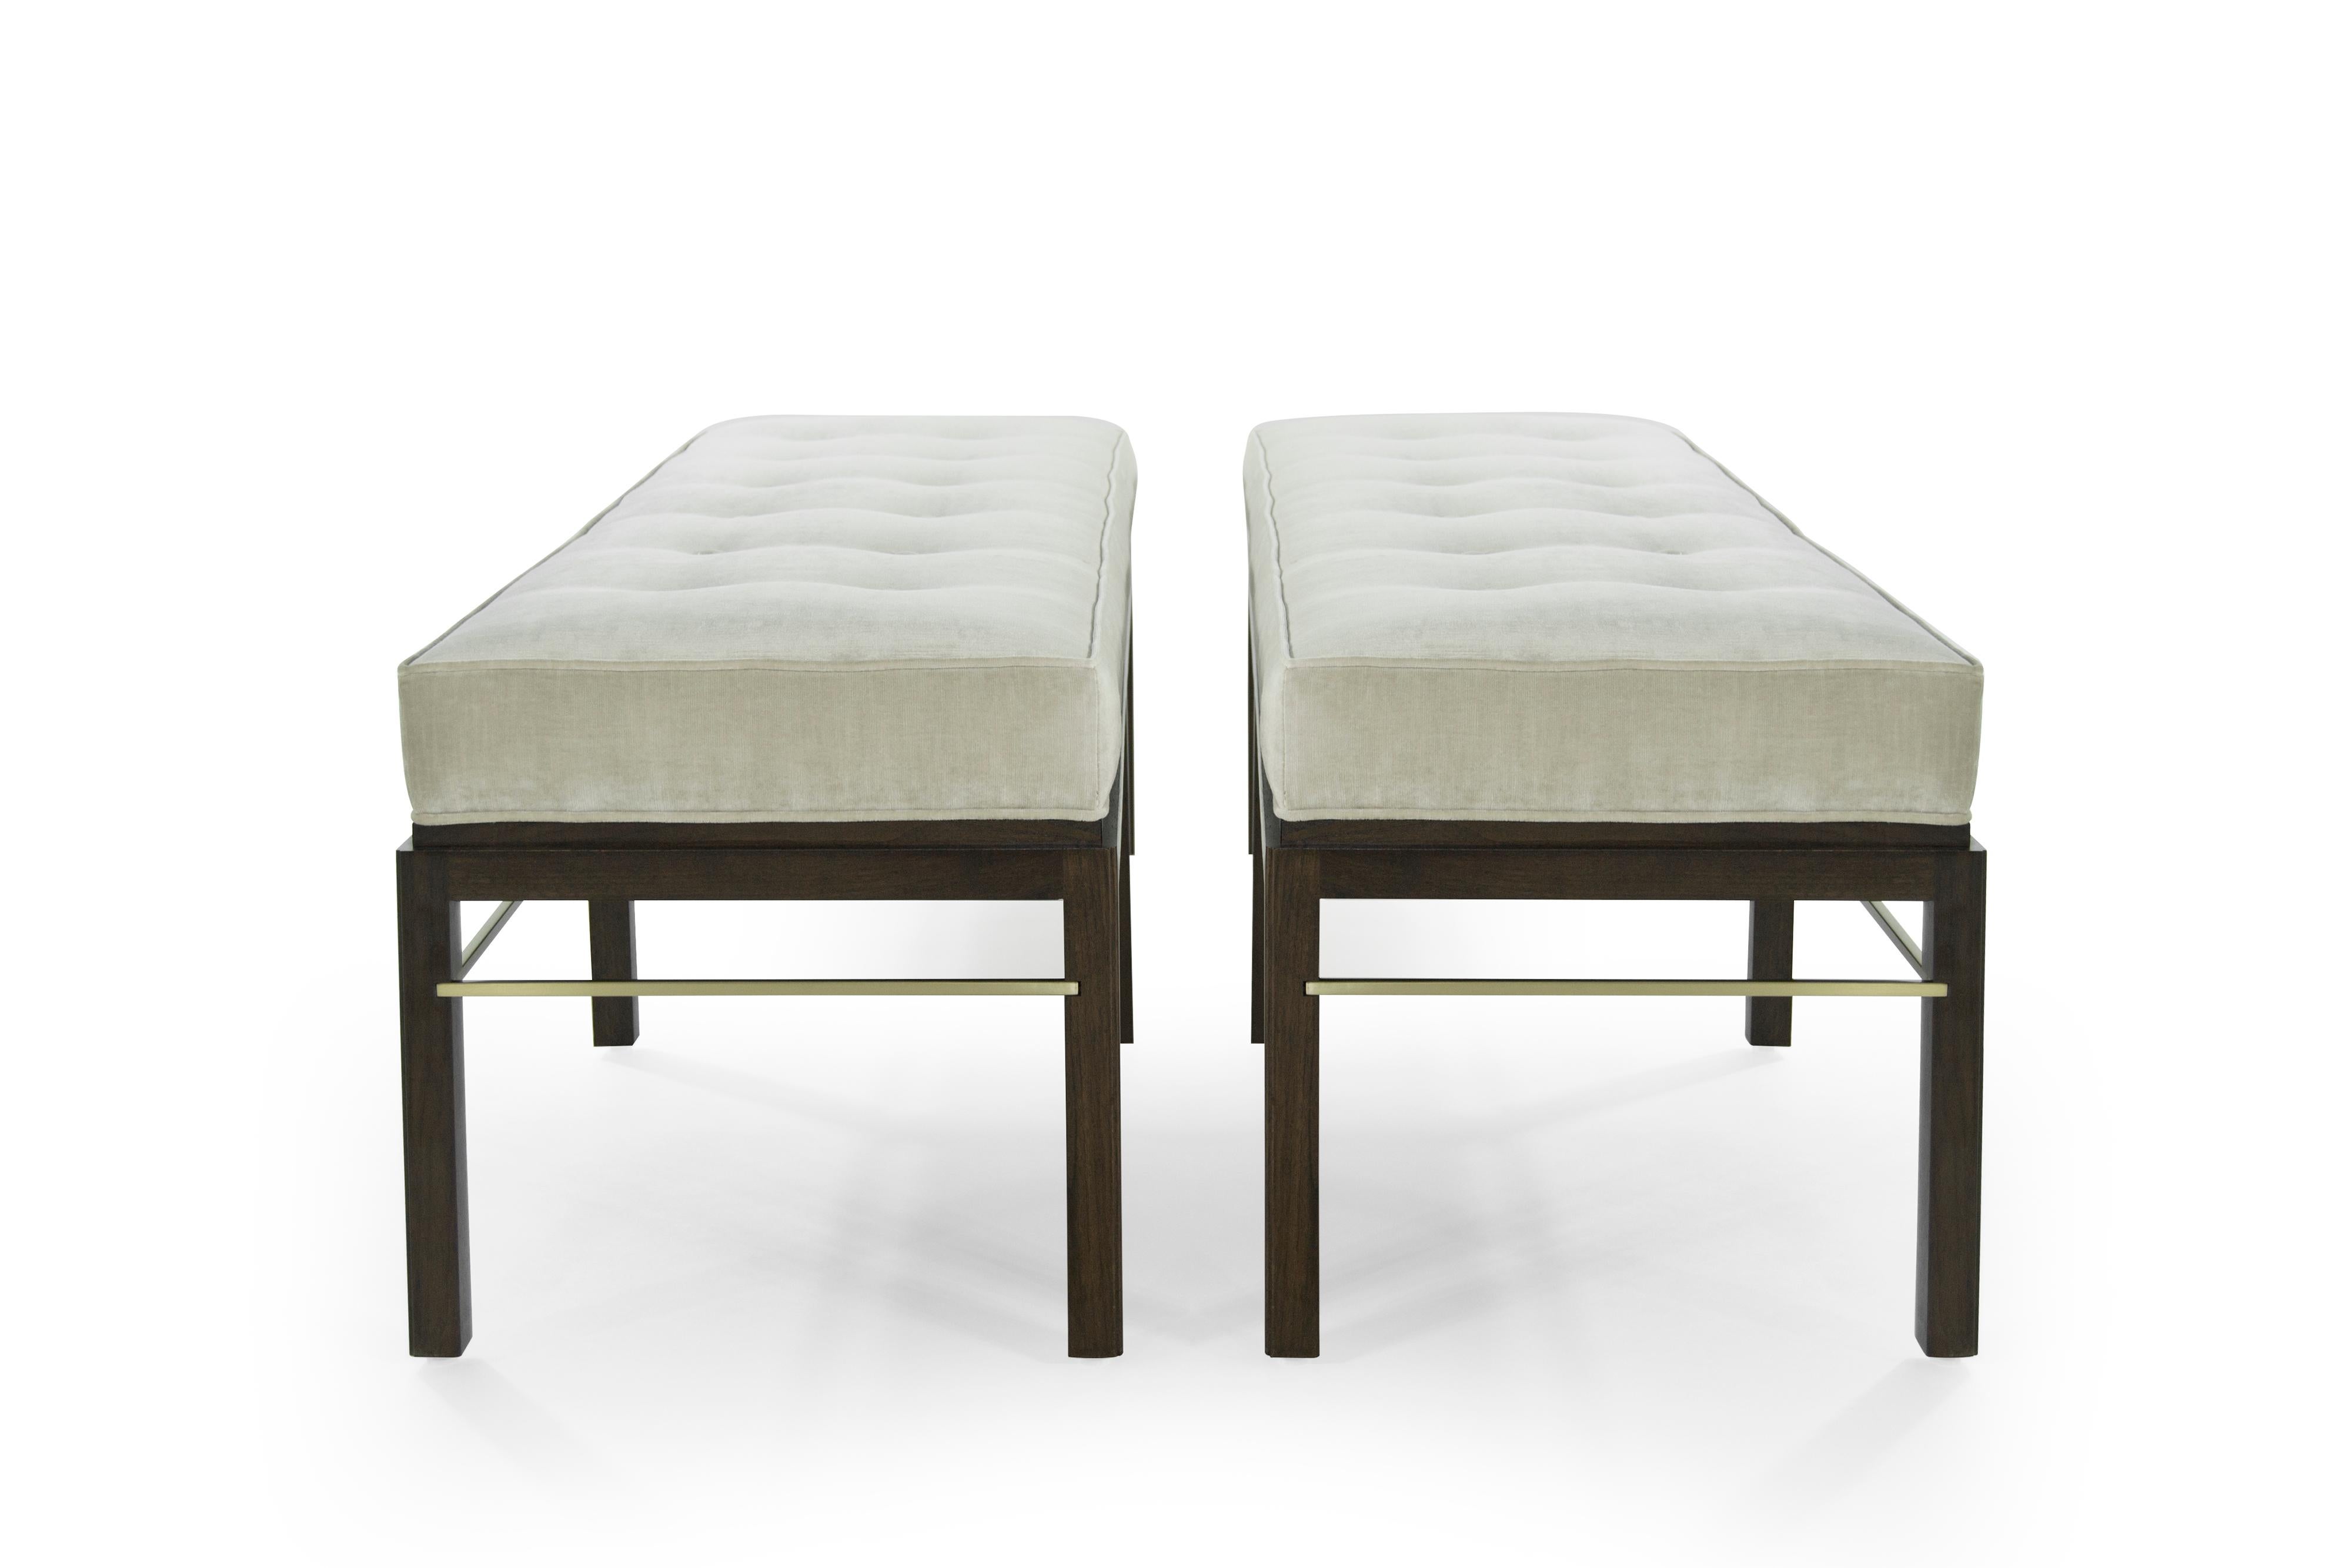 American Set of Edward Wormley for Dunbar Brass Stretcher Benches, 1950s